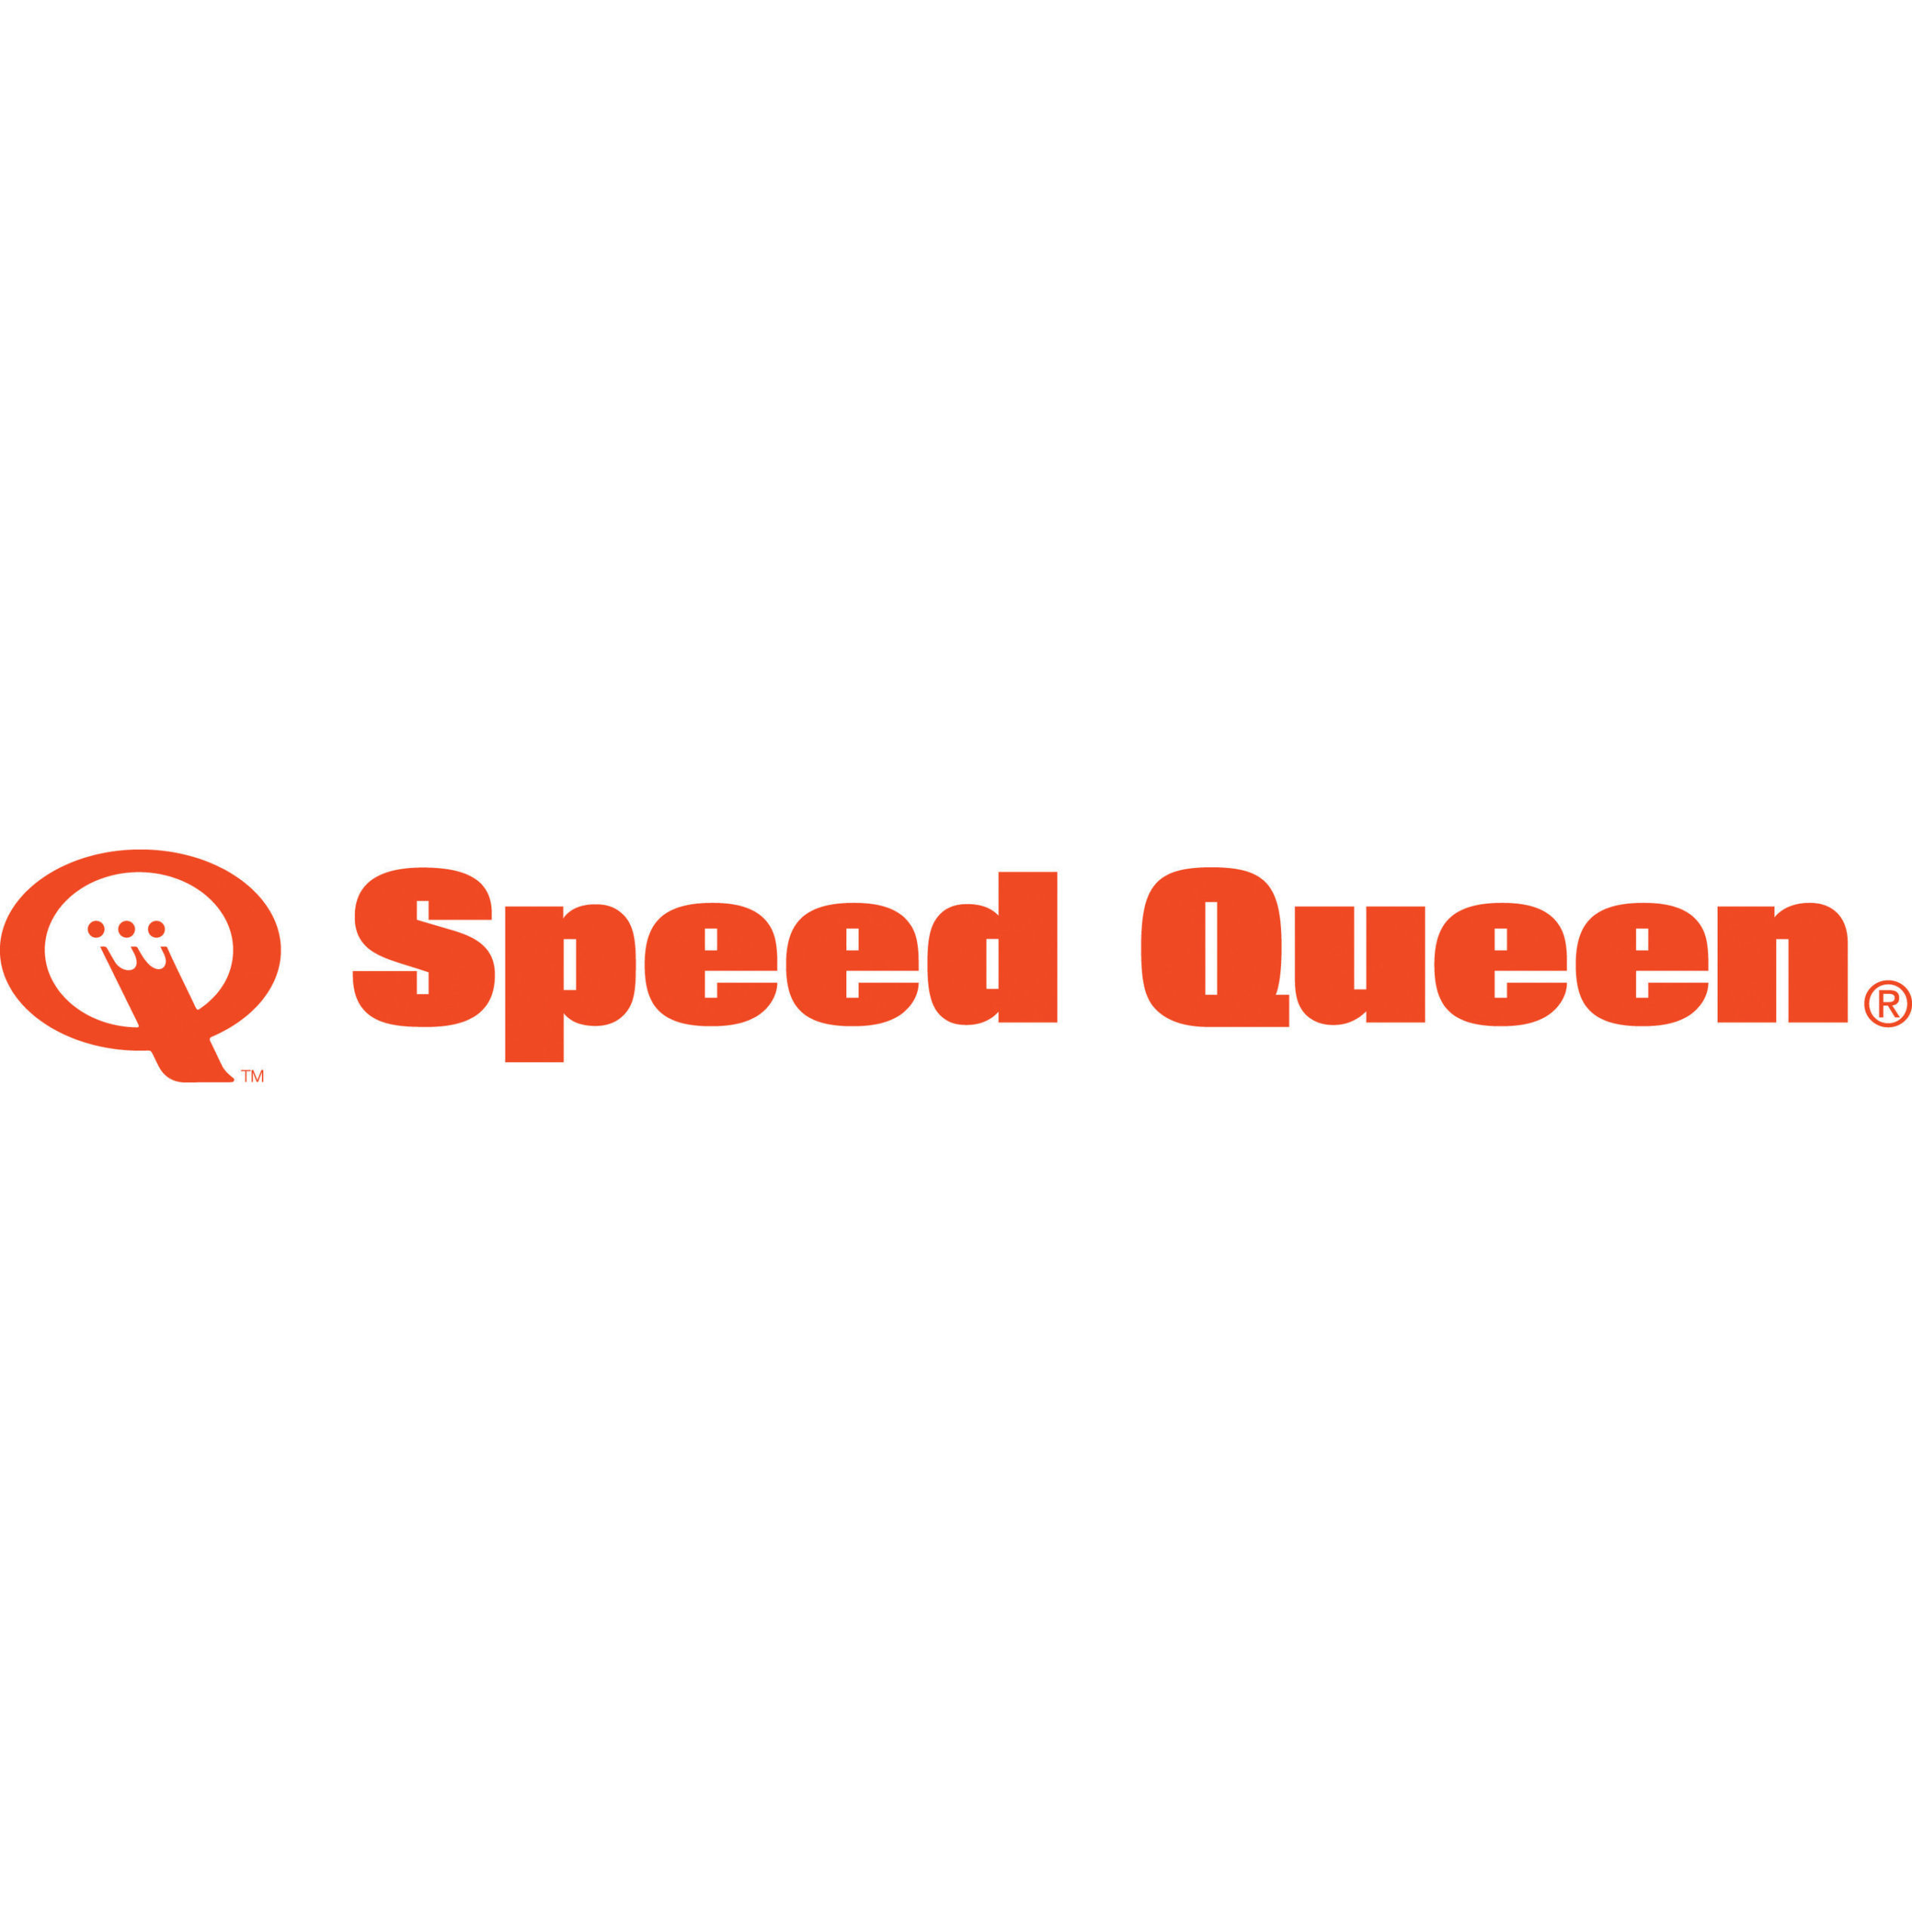 Speed Queen Launches New 'Confidence Plus' Extended Warranty